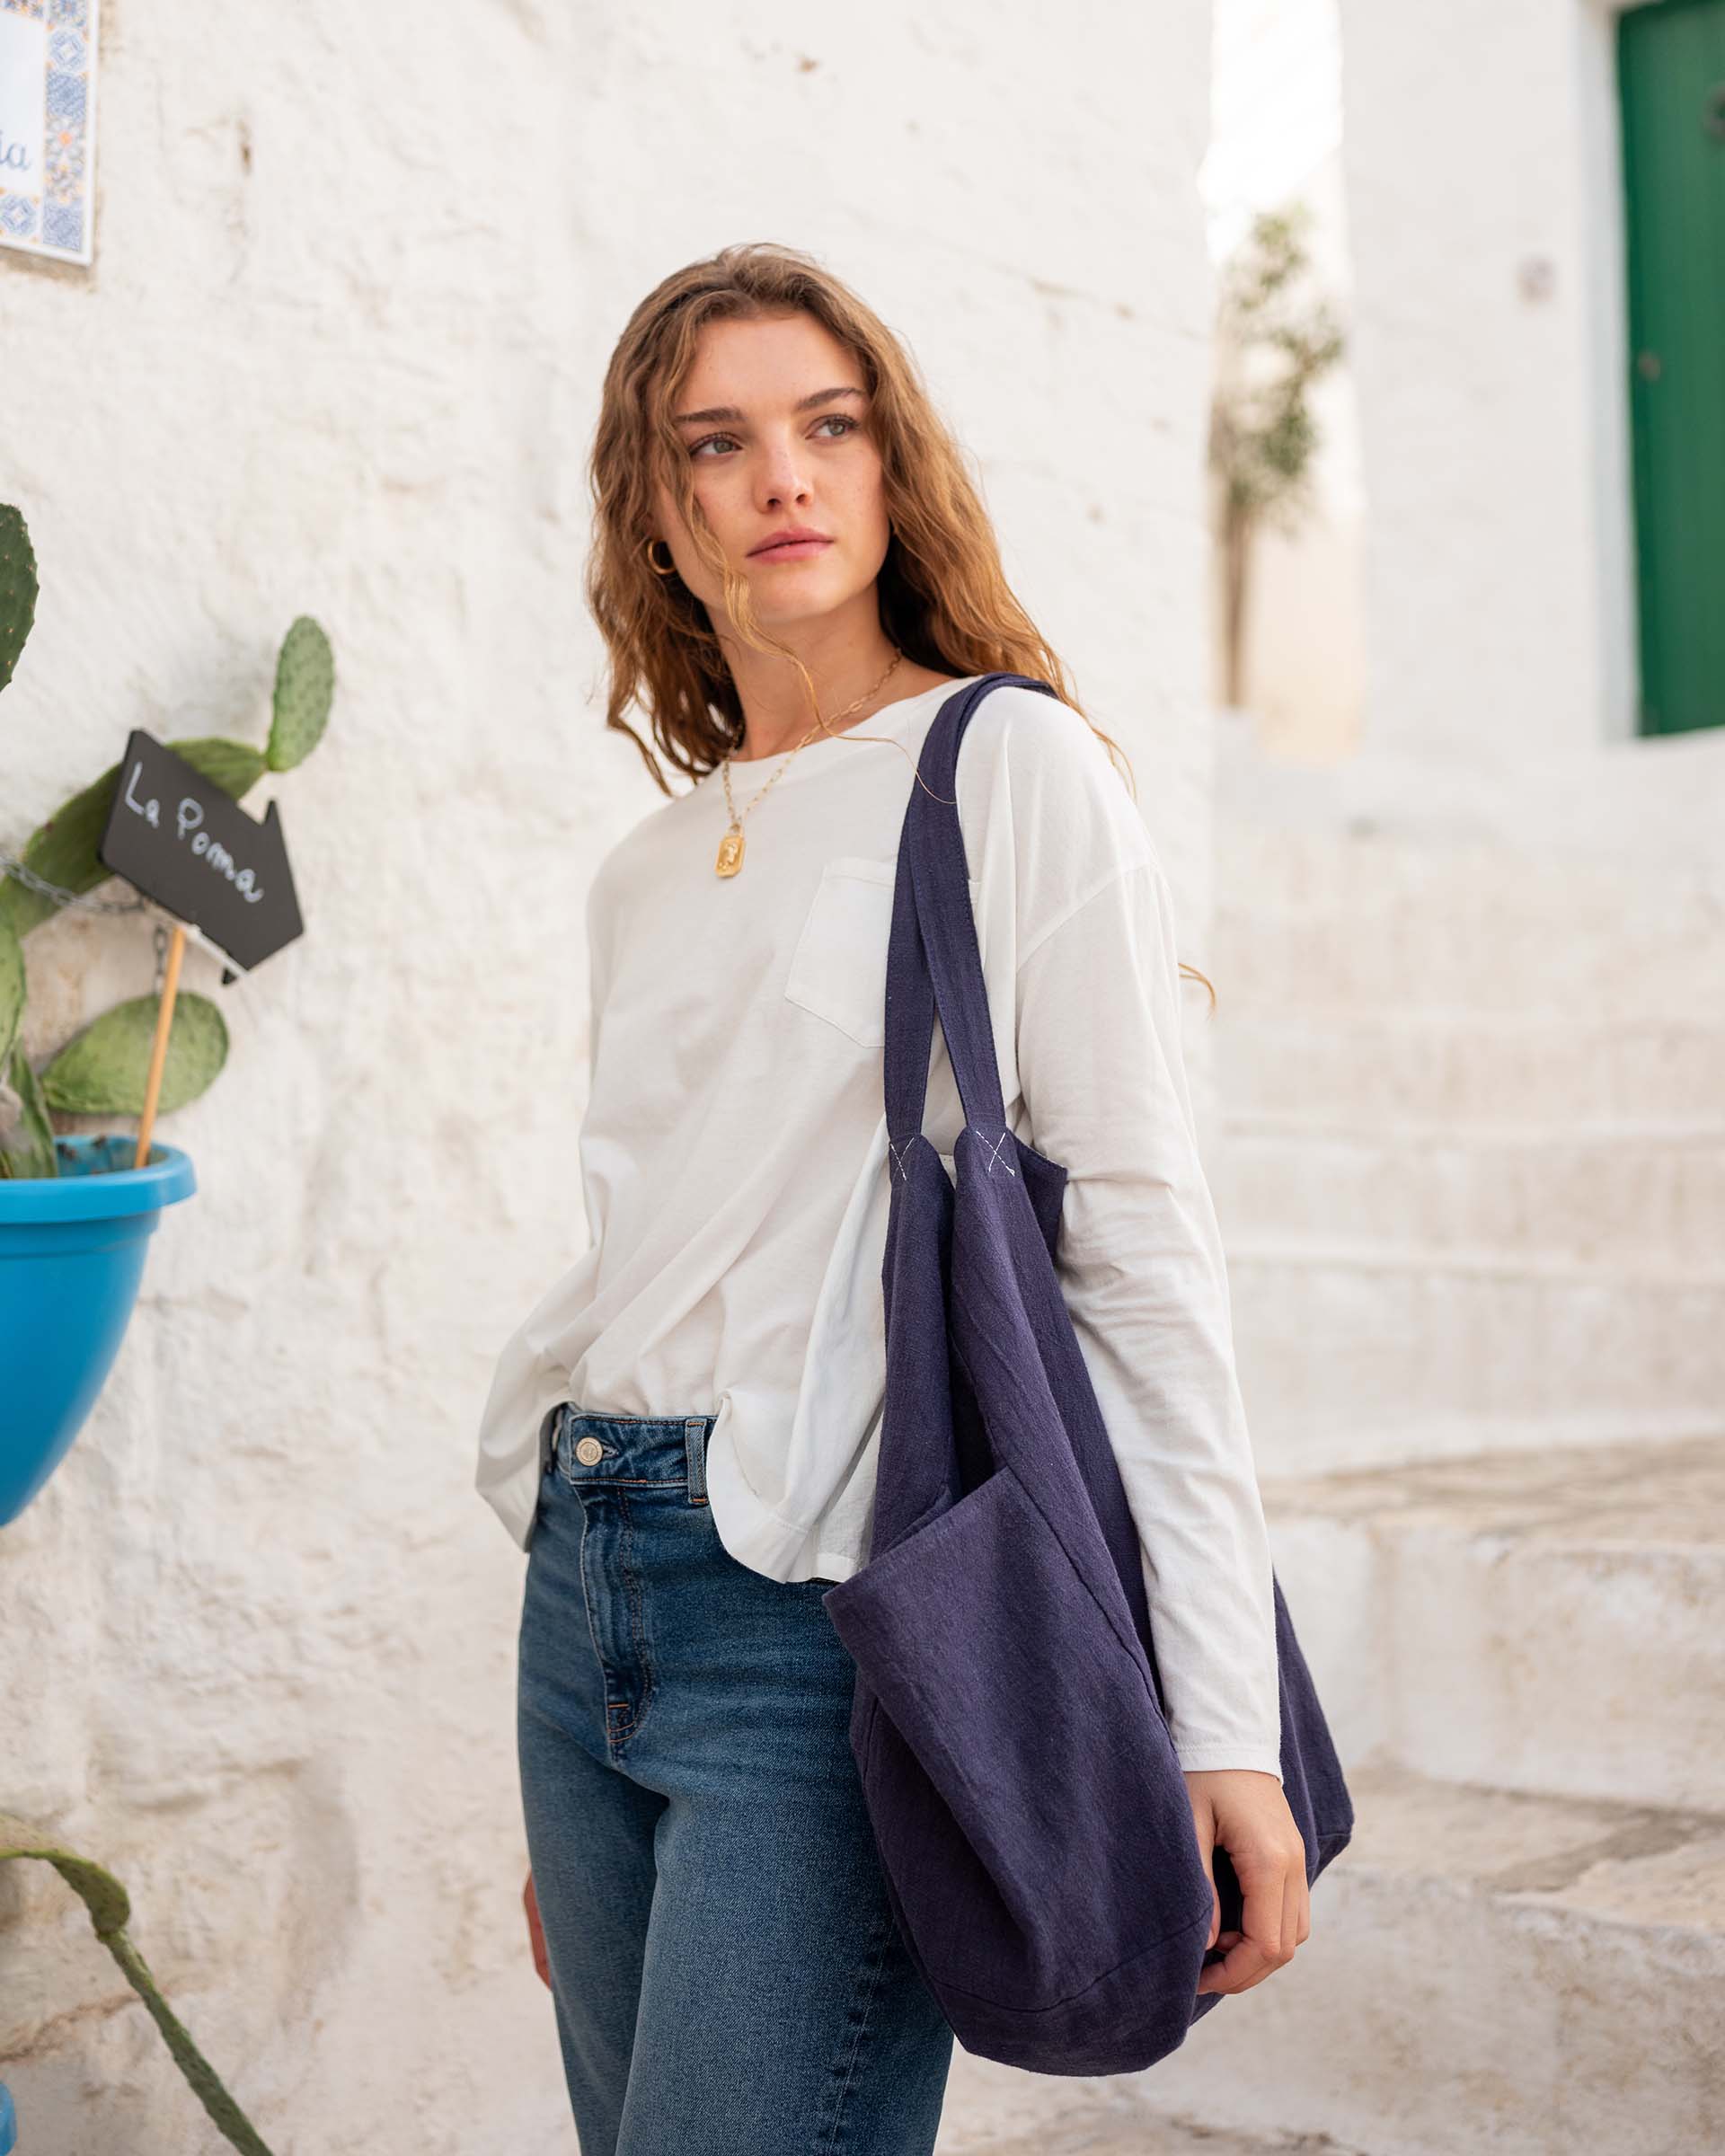 woman with mersea oversized canvas tote in navy blue standing on steps in front of white buildings